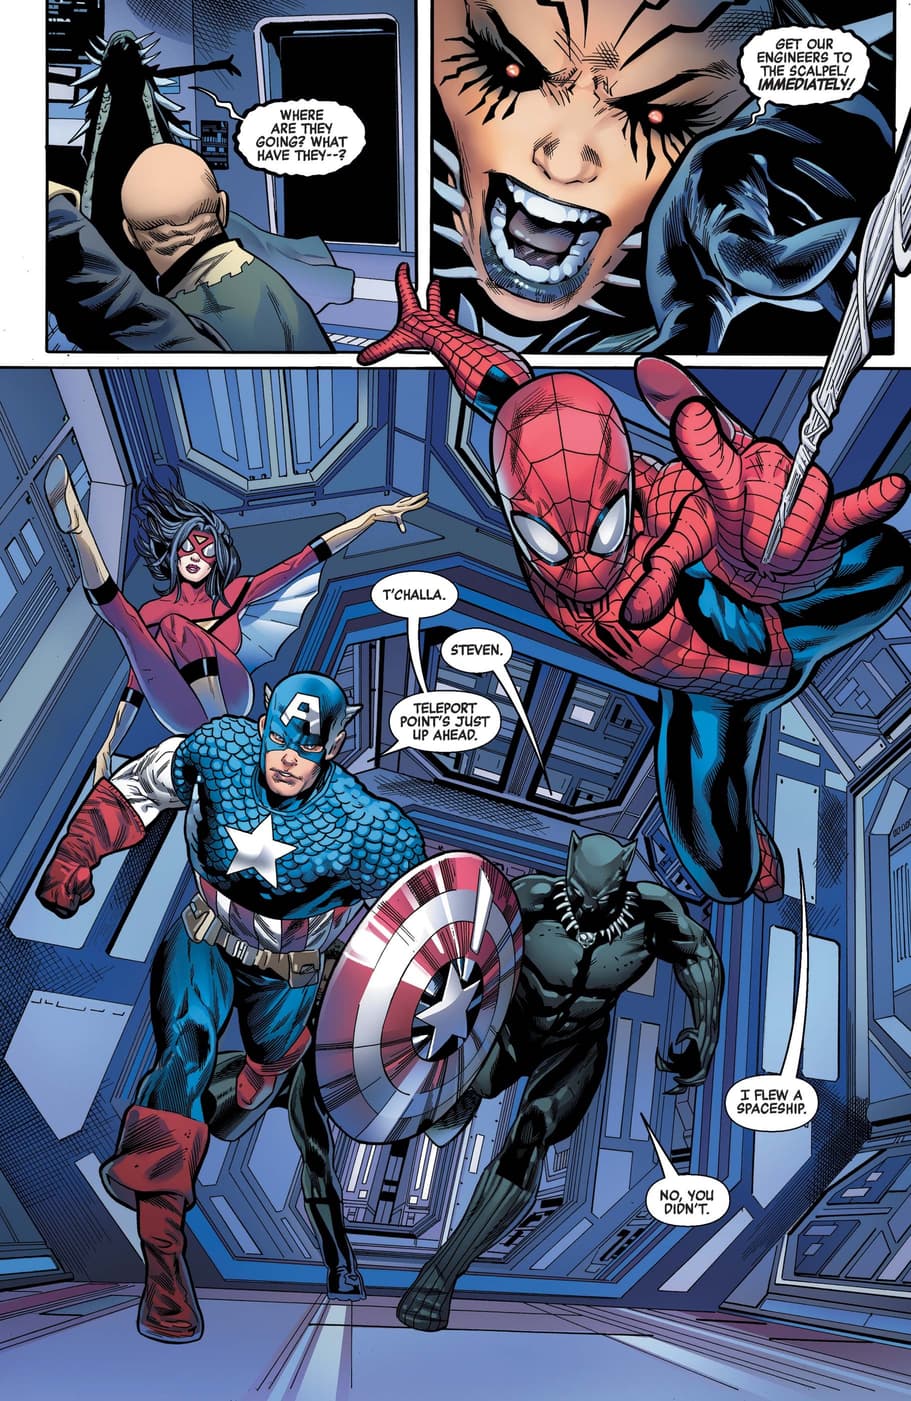 Preview page from ALL-OUT AVENGERS (2022) #1 by Greg Land and Frank D'Armata.